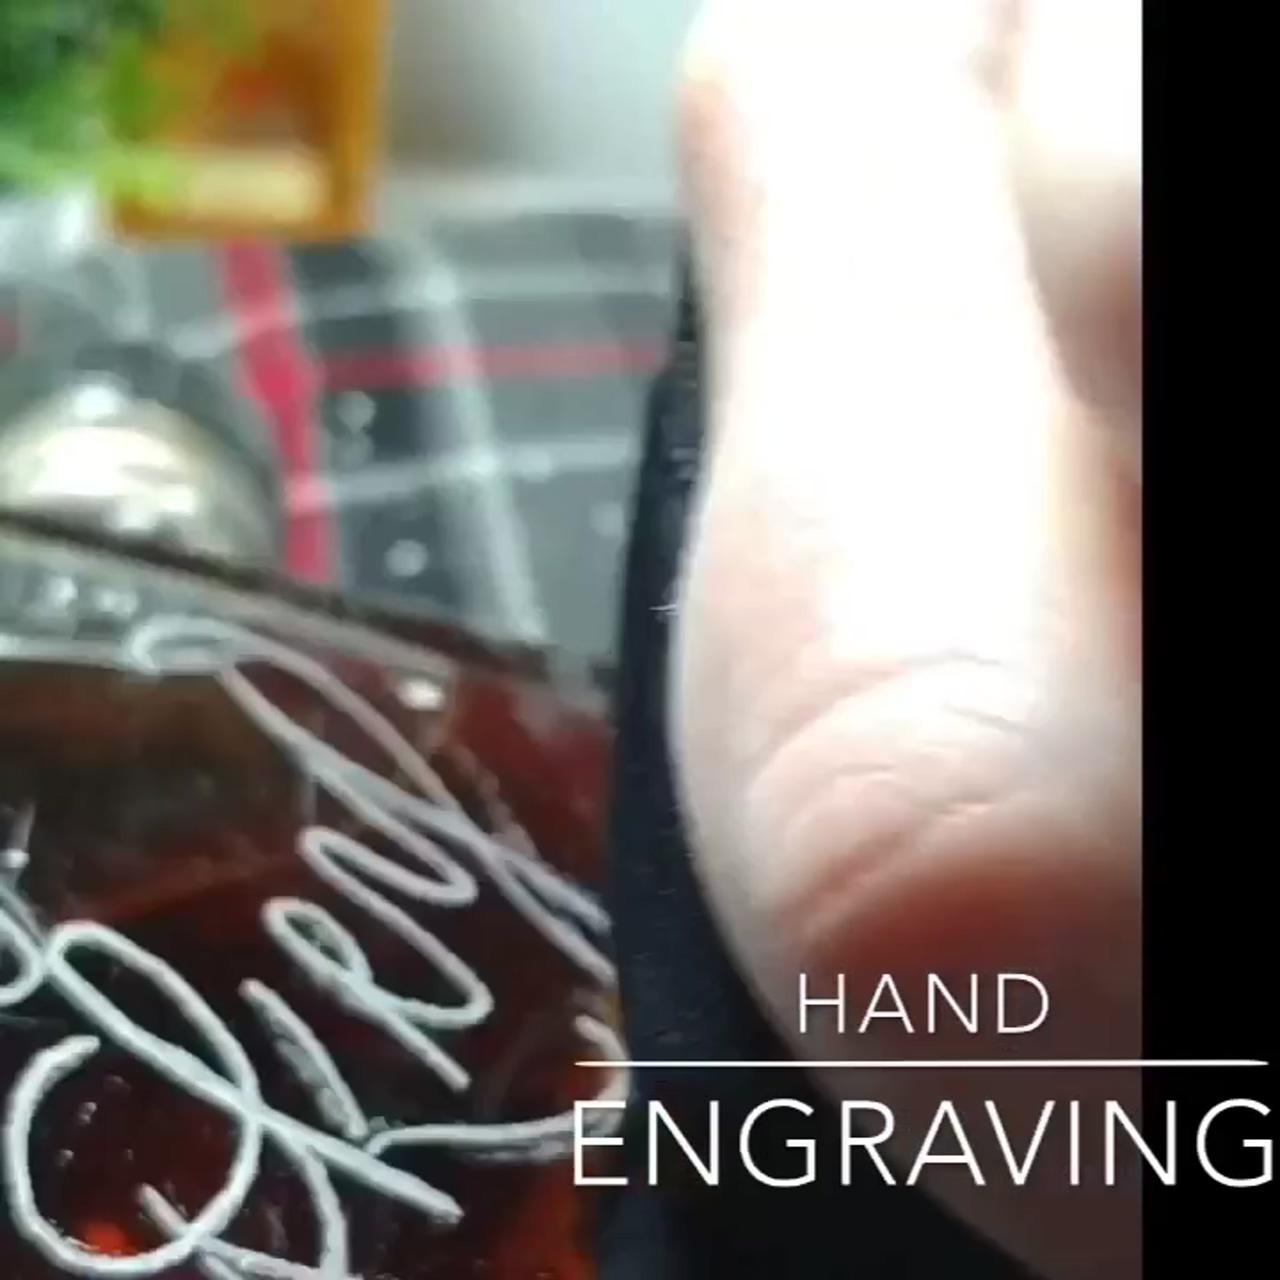 Hand engraving a whiskey bottle; amazing kinetic sand sculpture